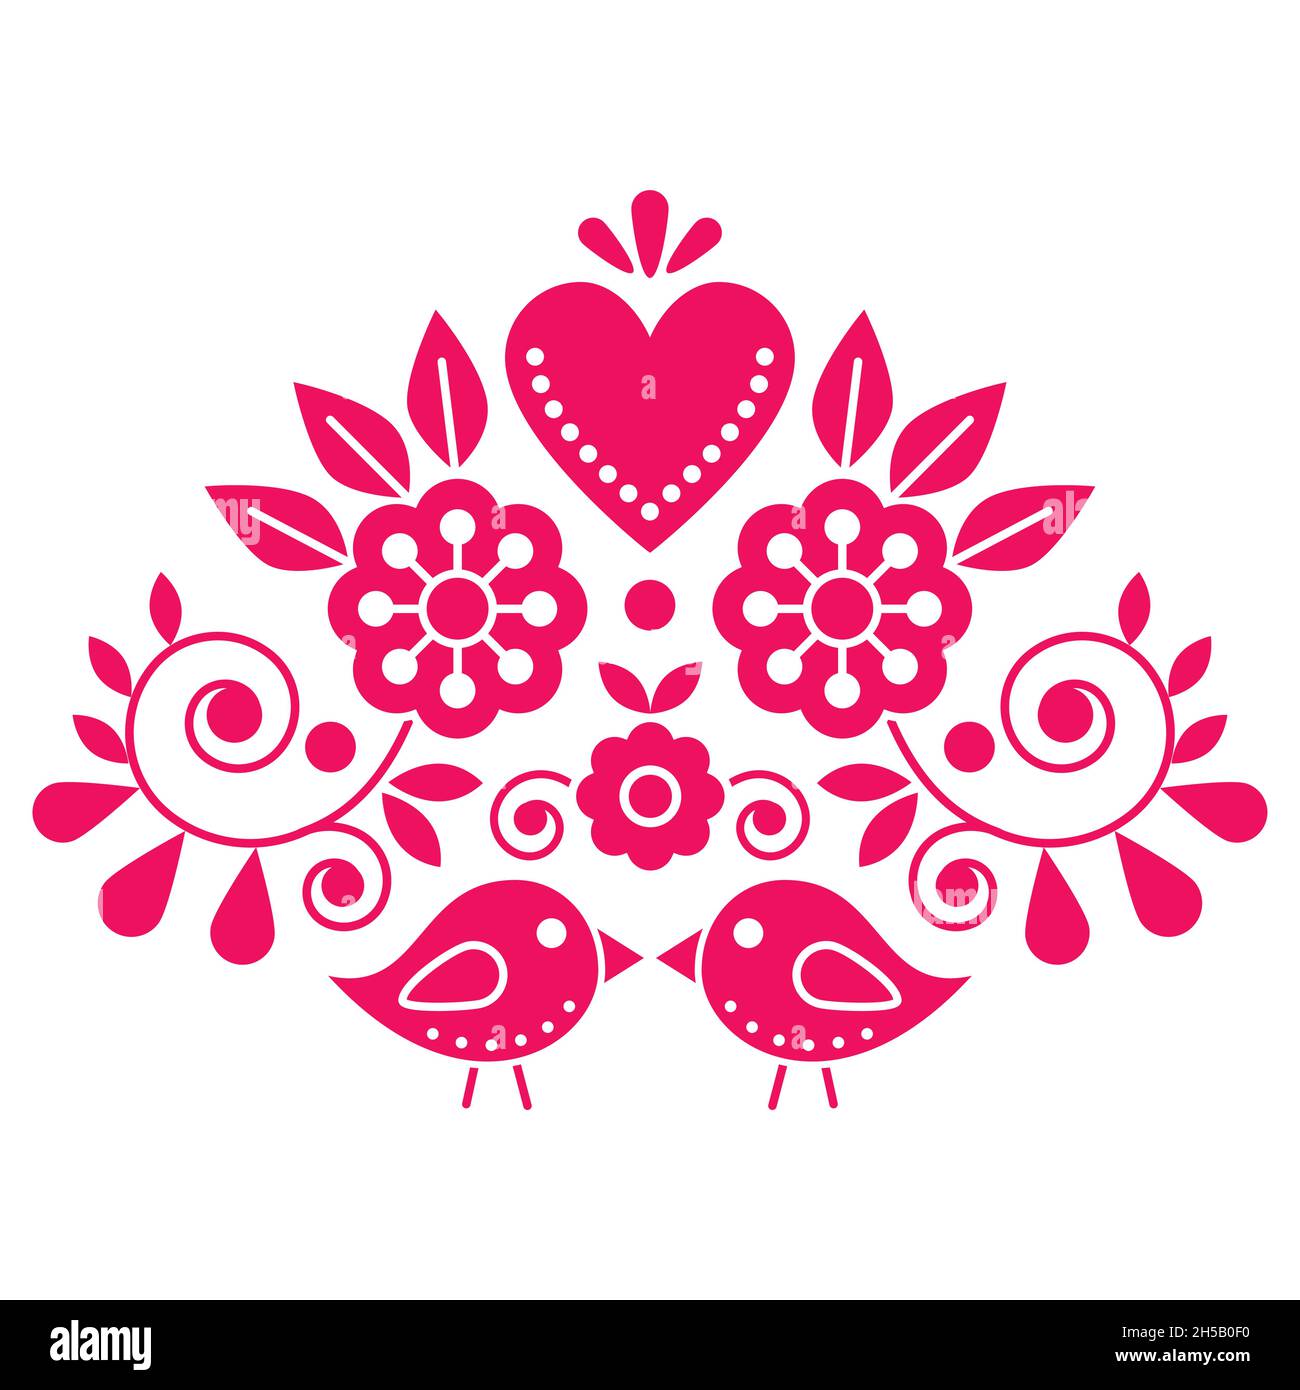 Swedish folk art vector cute pattern with pink birds, heart, and flowers inspired by the traditional Scandinavian art - Valentine's Day greeting card Stock Vector